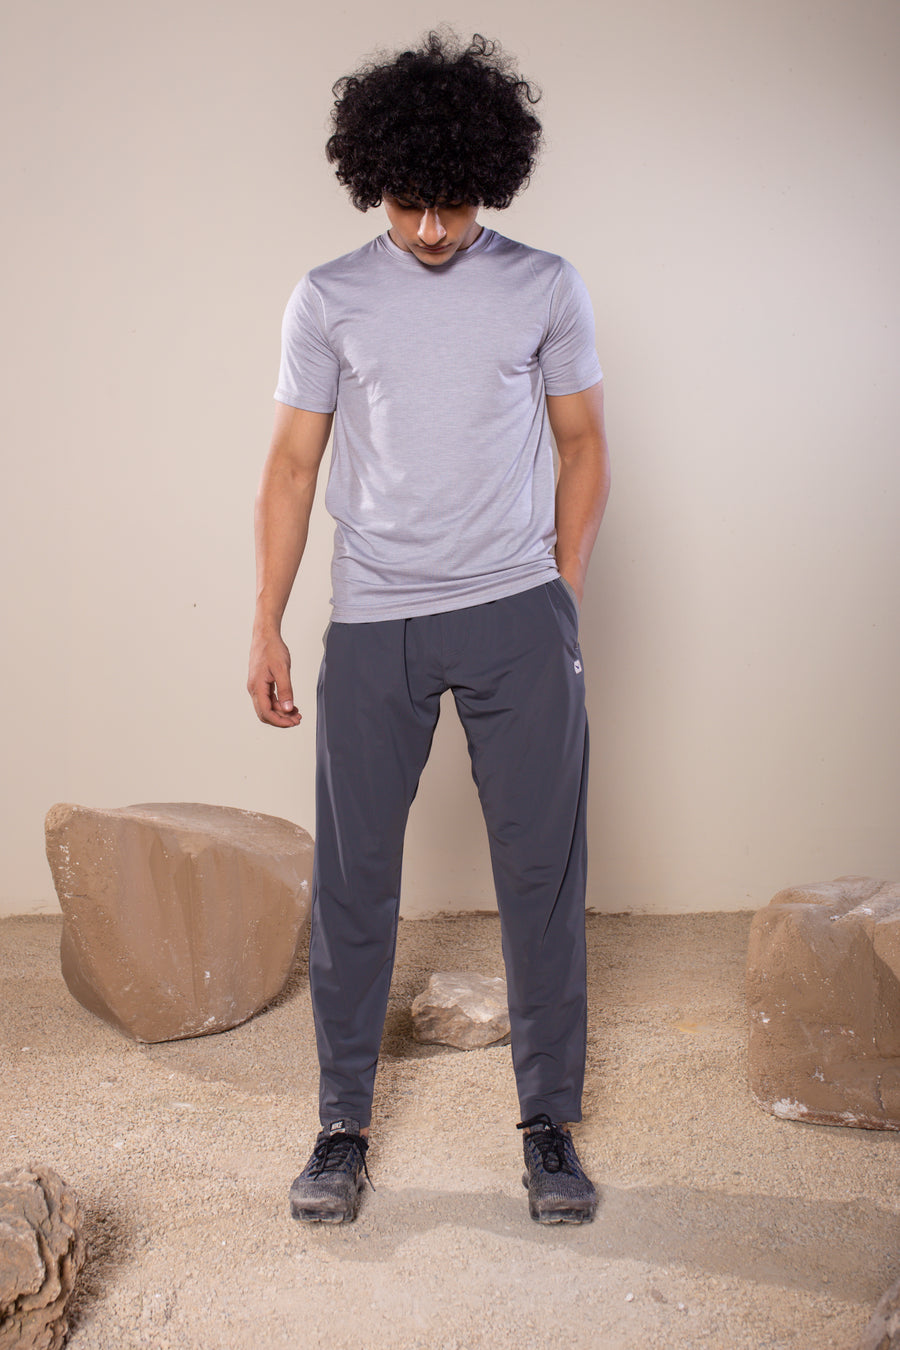 Men's Wanderlust Pant Dark Gray | VOLO Apparel | These pants are designed to give you wanderlust, an ultralight super durable athletic pant with a five pocket design, a 3 point gusset for all your movements and a high ankle tapered bottom. The revolutional Italian nylon is patented with UPF 50 protection and extreme breathability. The one pant to go everywhere and do everything!